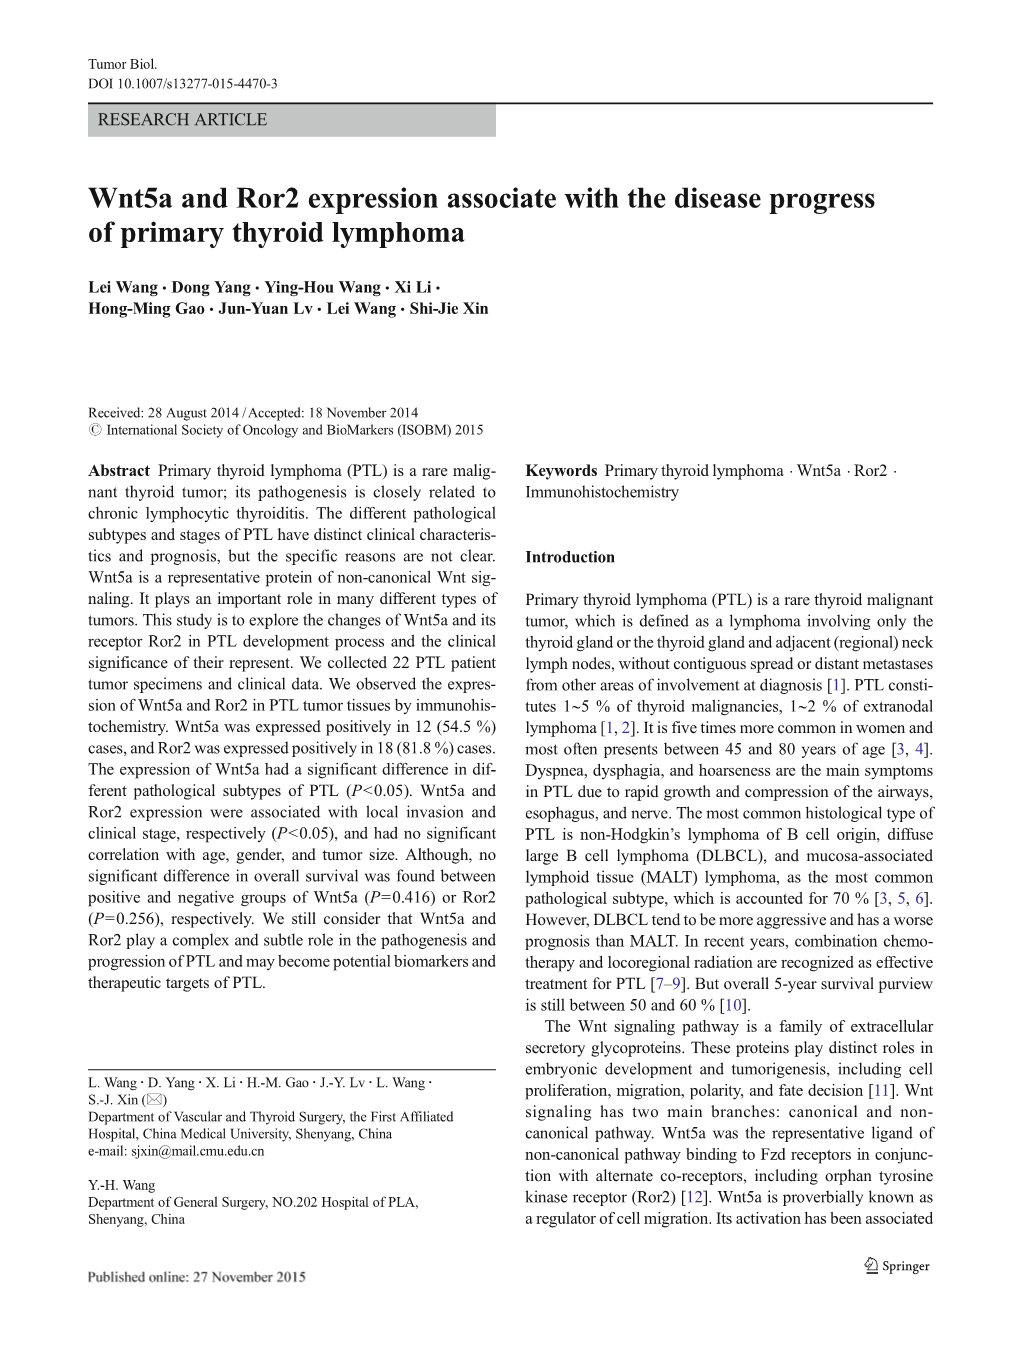 Wnt5a and Ror2 Expression Associate with the Disease Progress of Primary Thyroid Lymphoma